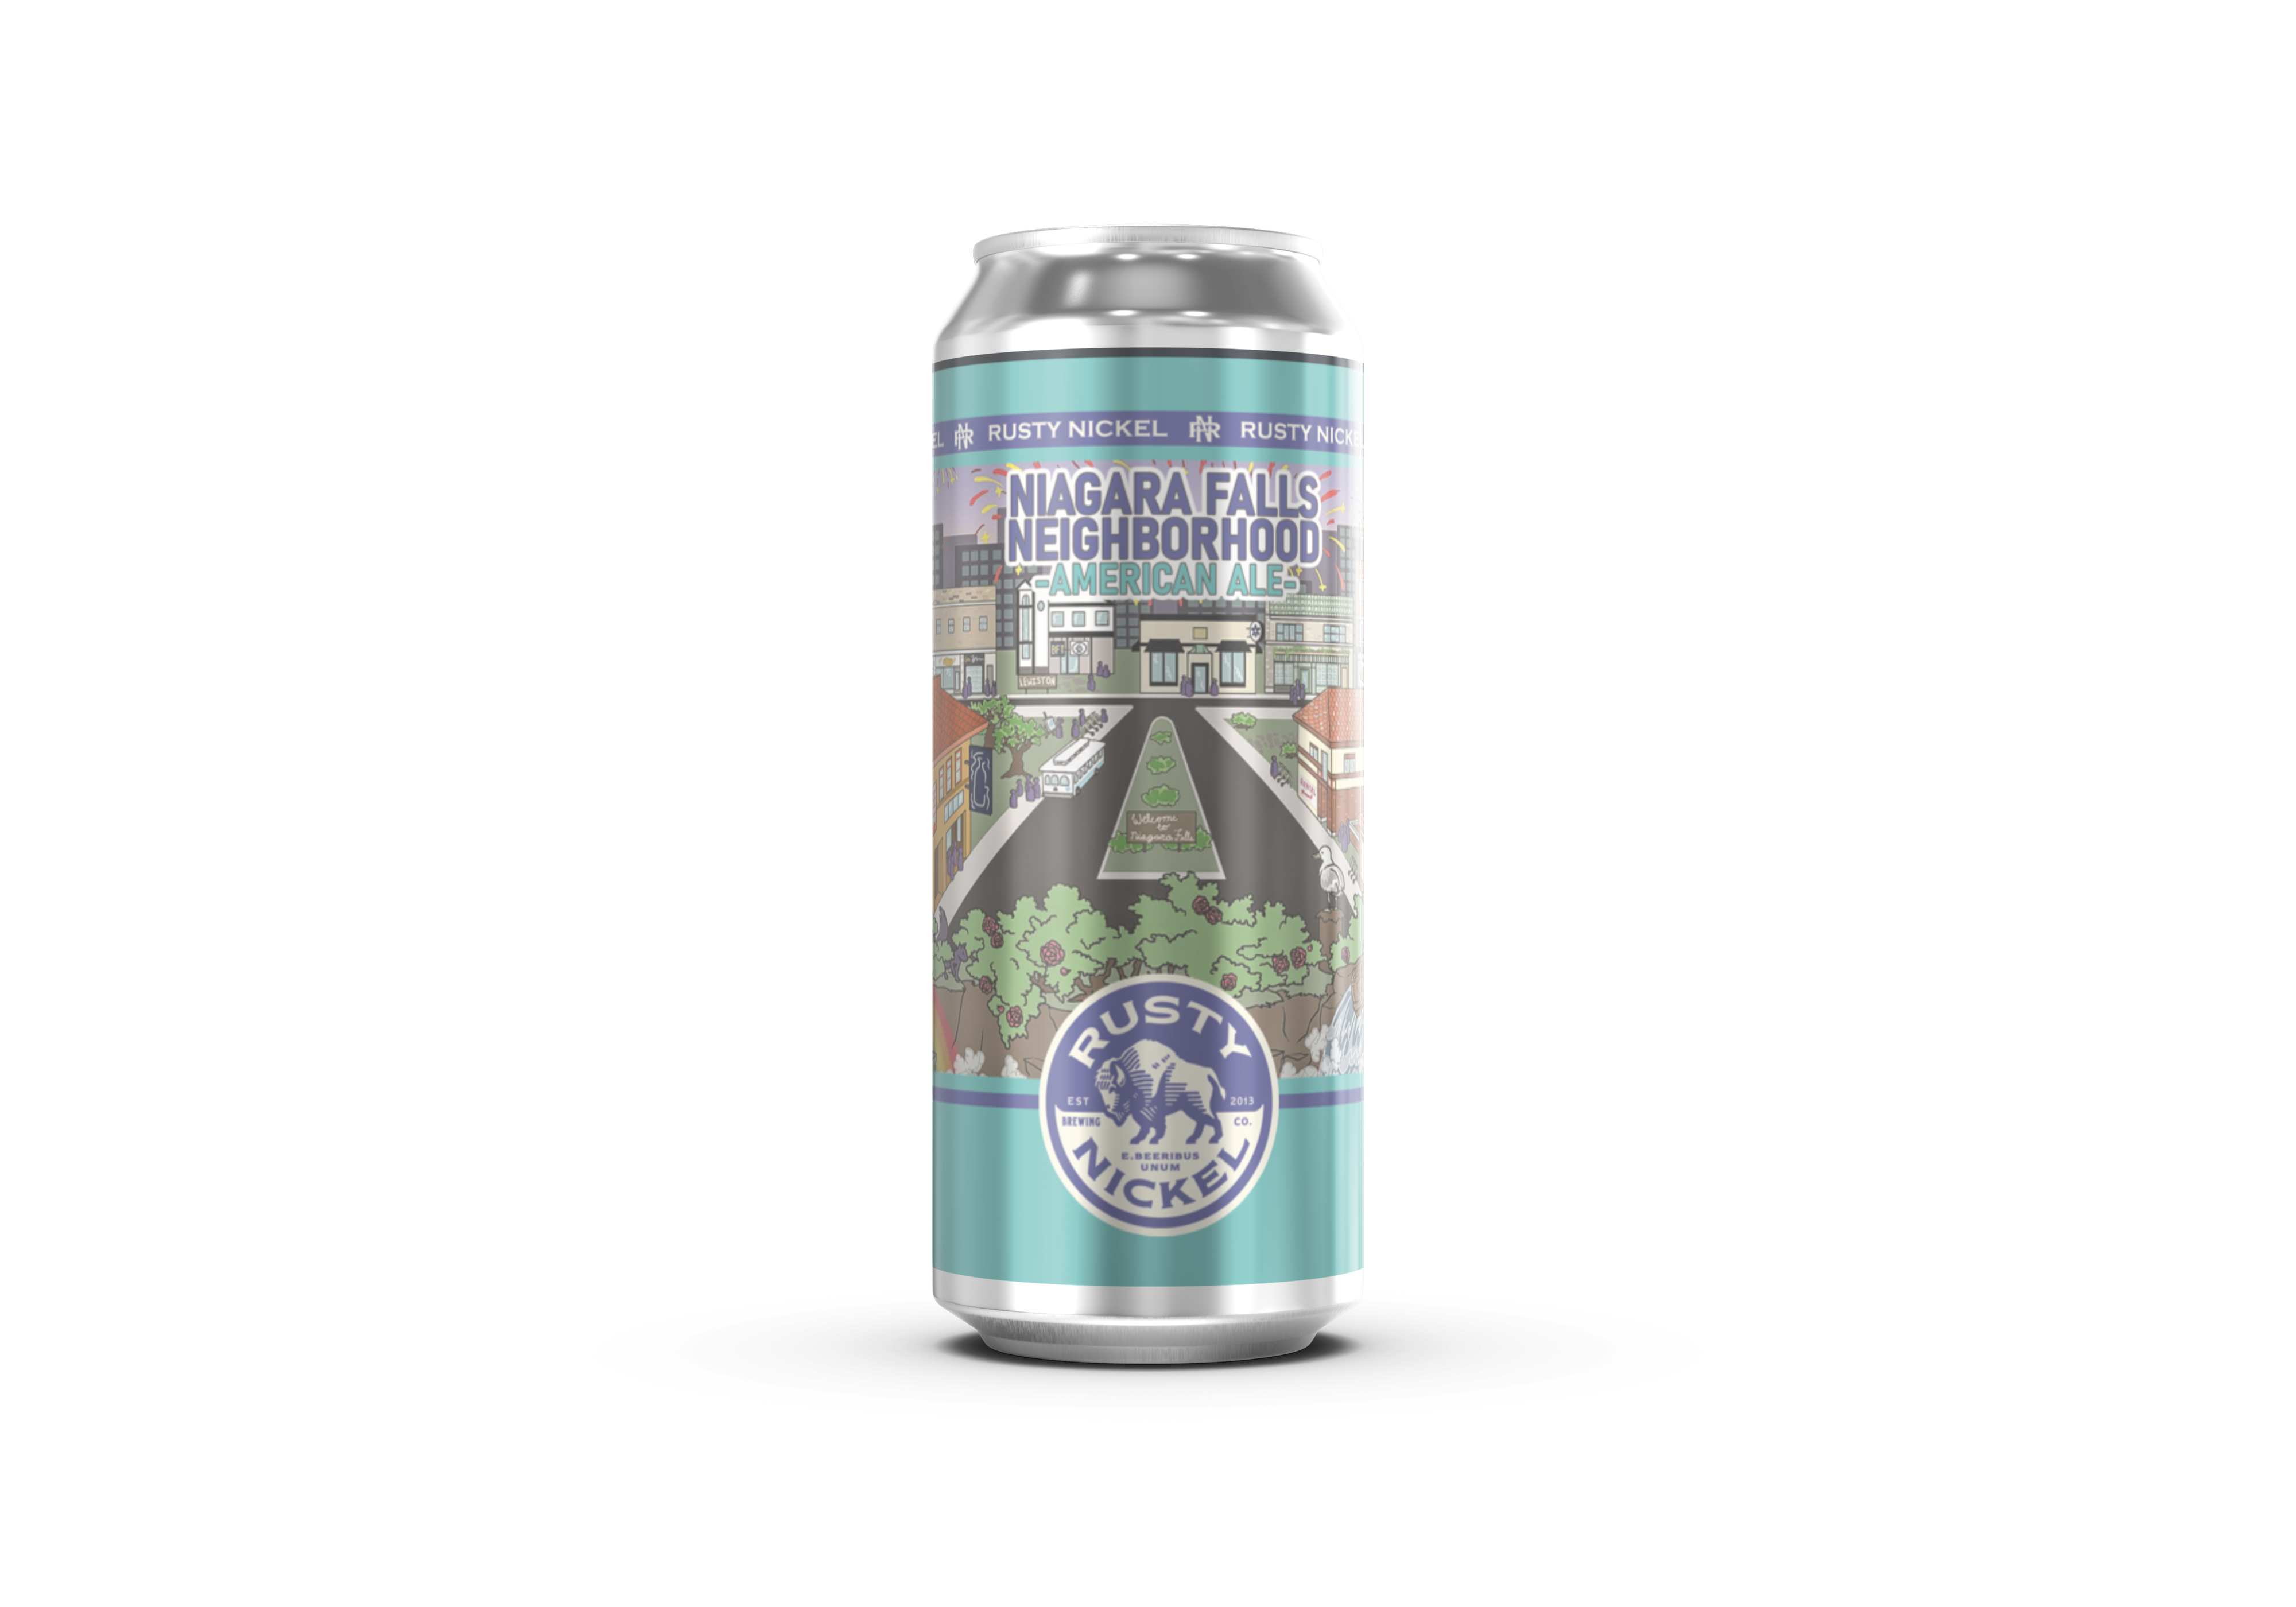 Mock up of beer can with Niagara Falls Neighborhood Ale label featuring a graphic of Old Falls Street. Image includes a road, businesses, people walking, and shrubs.